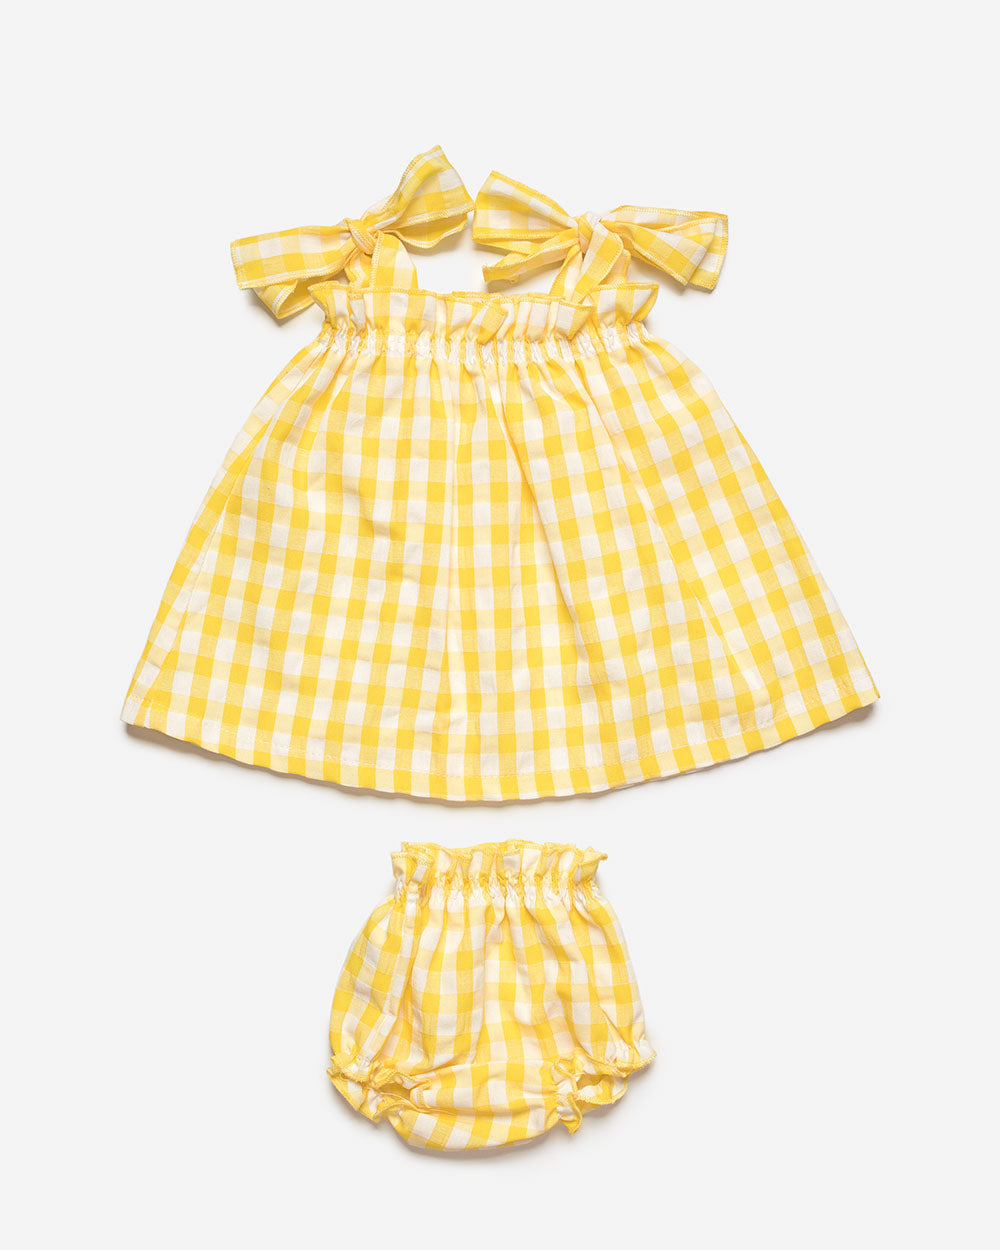 NEW SS23 Juliana Yellow Gingham Jam Pants Outfit J7141